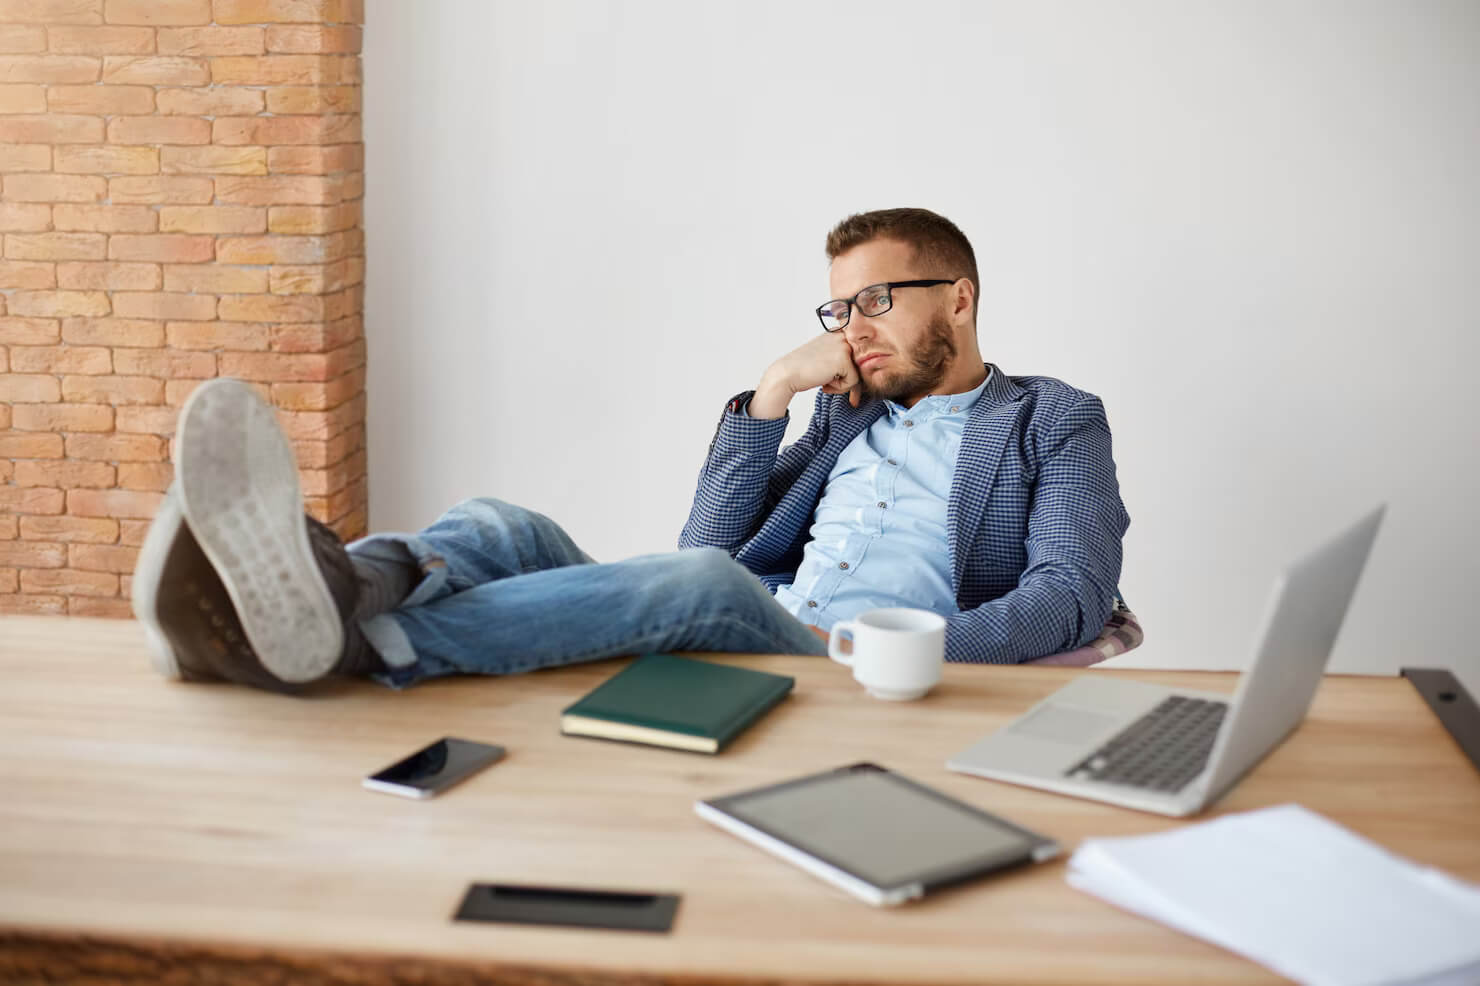 Lazy employee was hired after recruitment mistakes were made. He is not productive, he is sitting the office bored